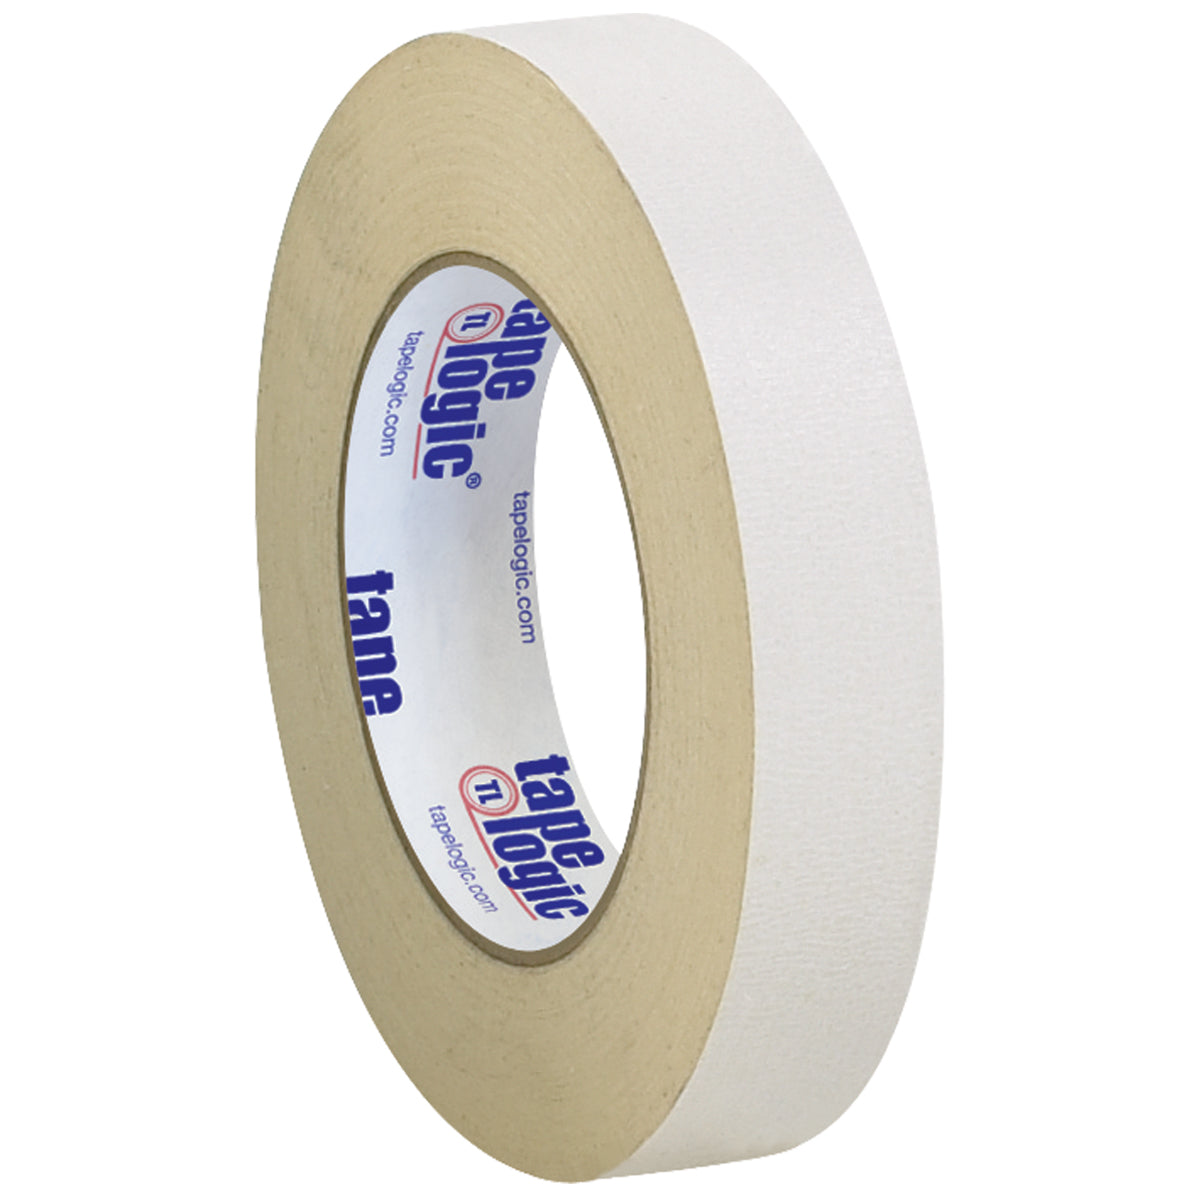 1 x 60 yds 4.9 Mil White Colored Masking Tape